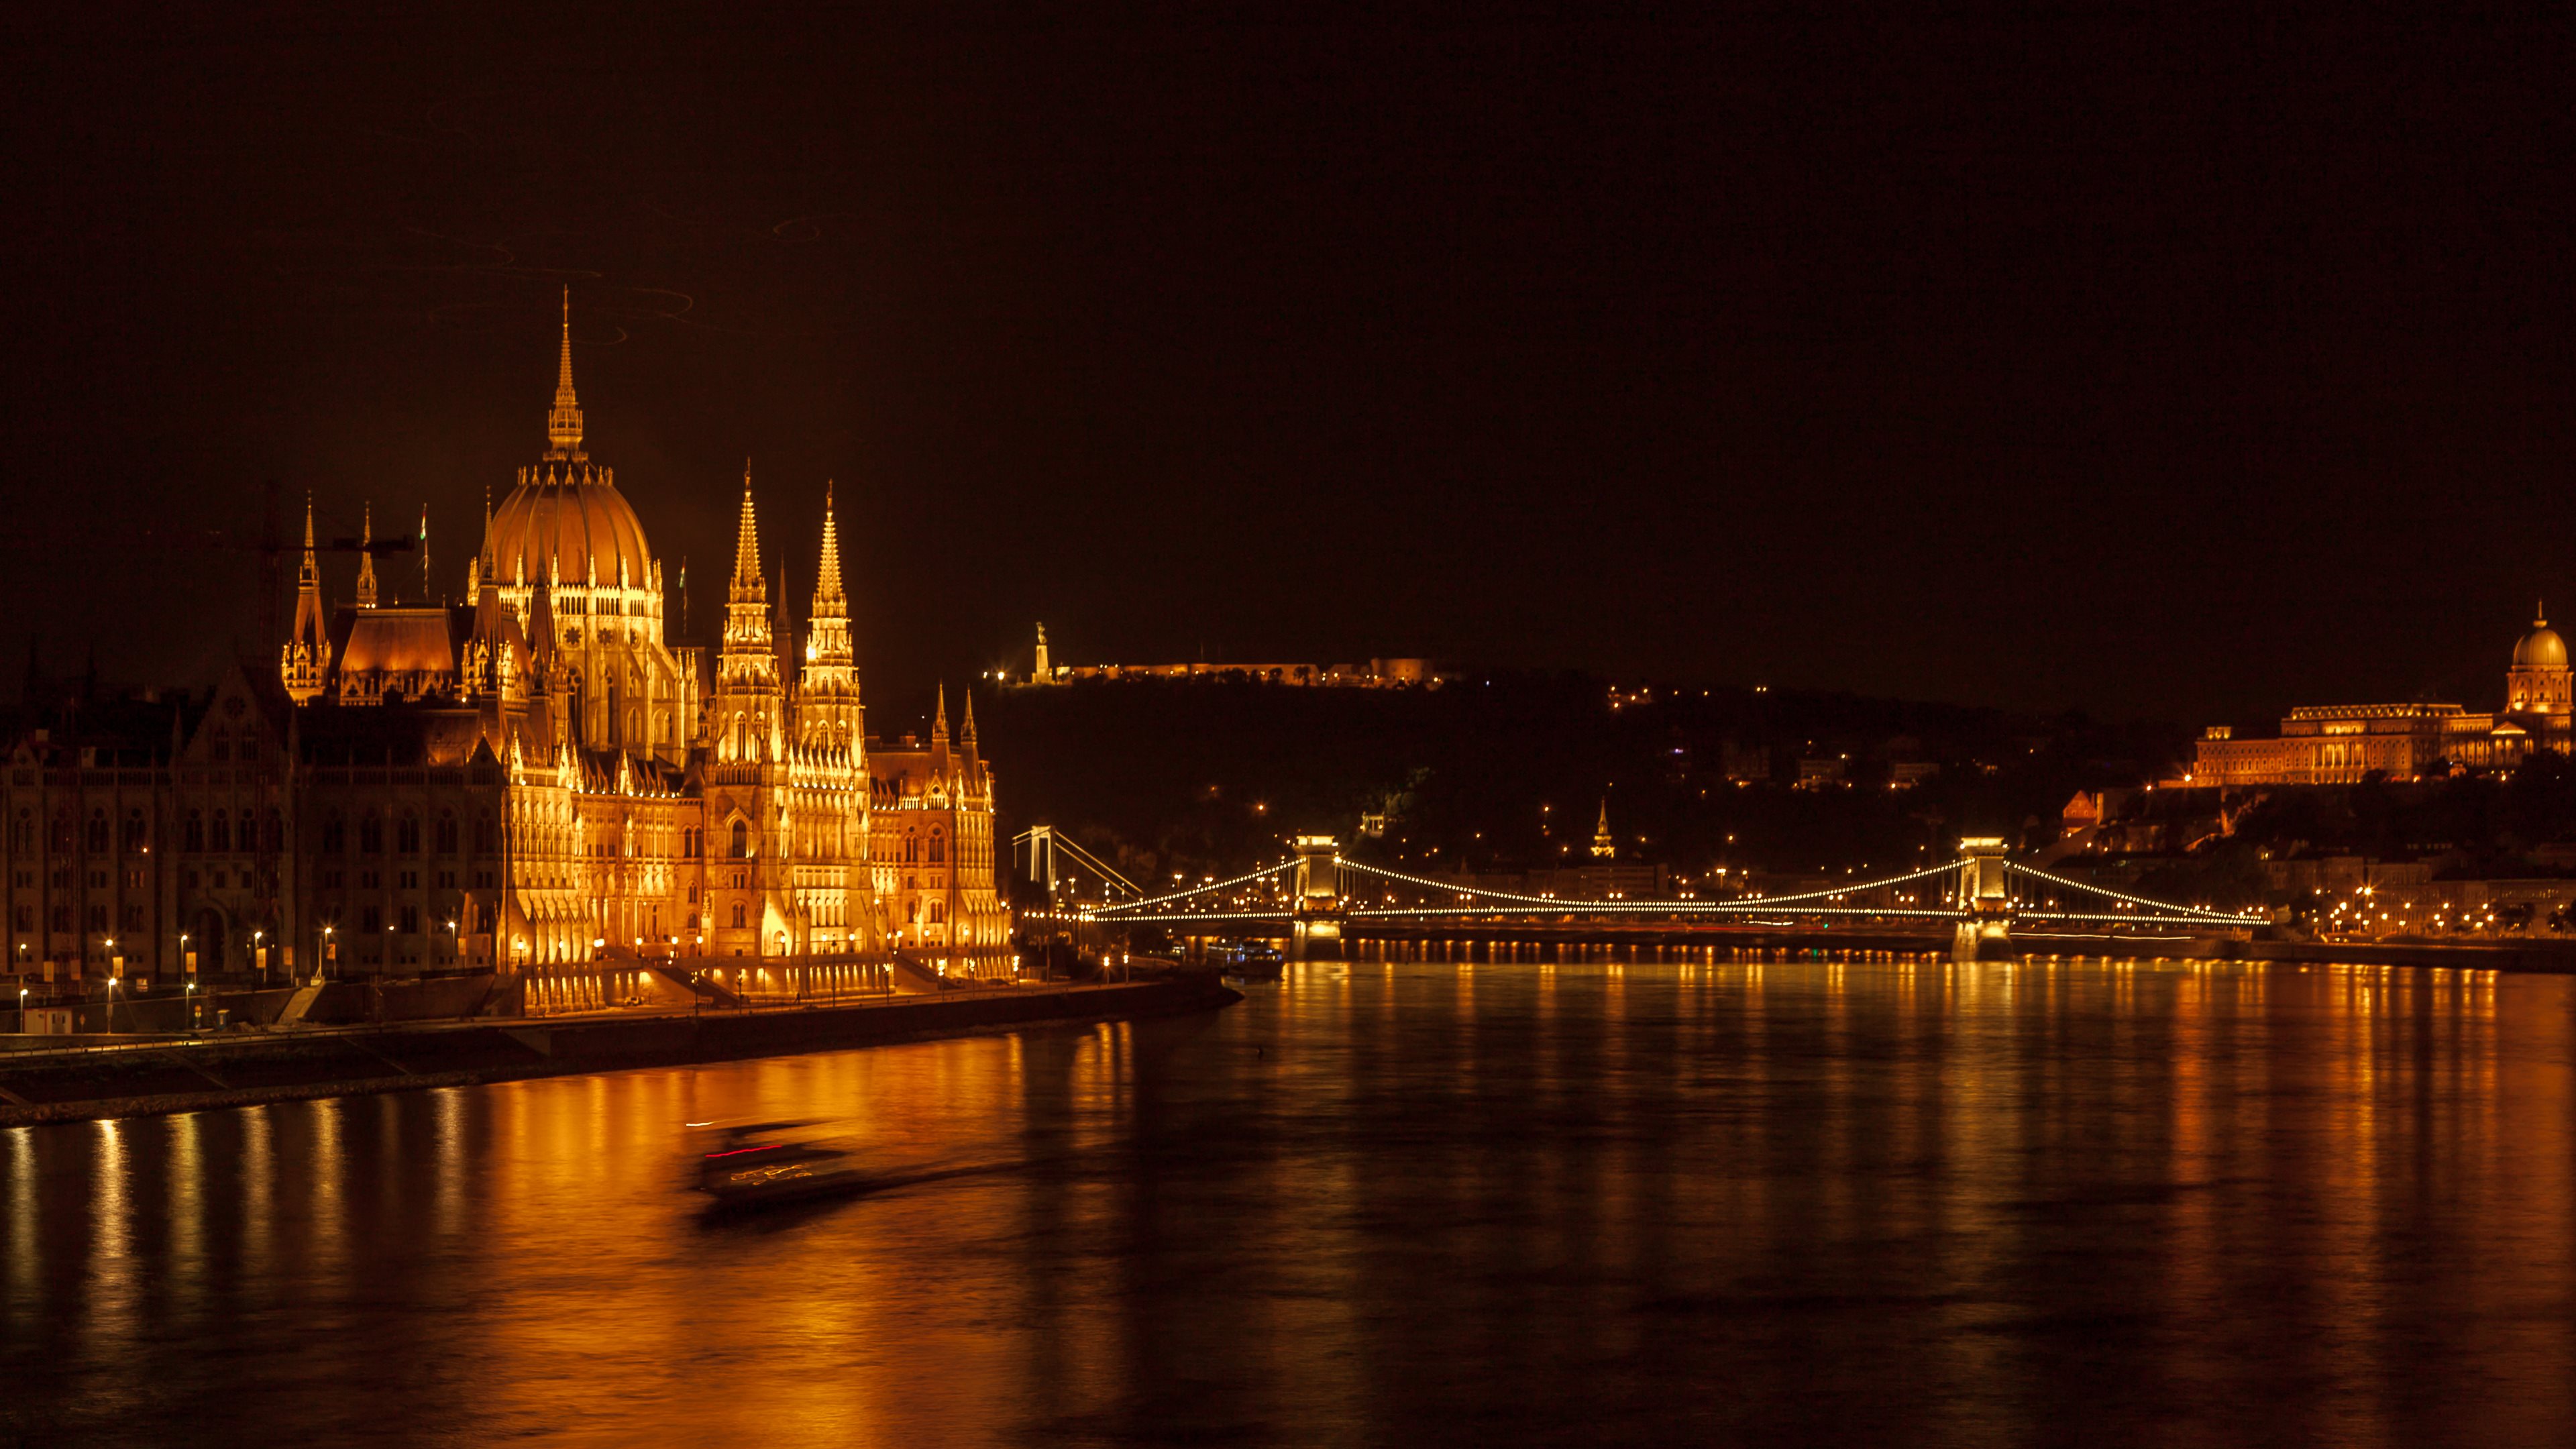 Buda Castle Wallpaper Hd - Budapest Parliament By Night , HD Wallpaper & Backgrounds